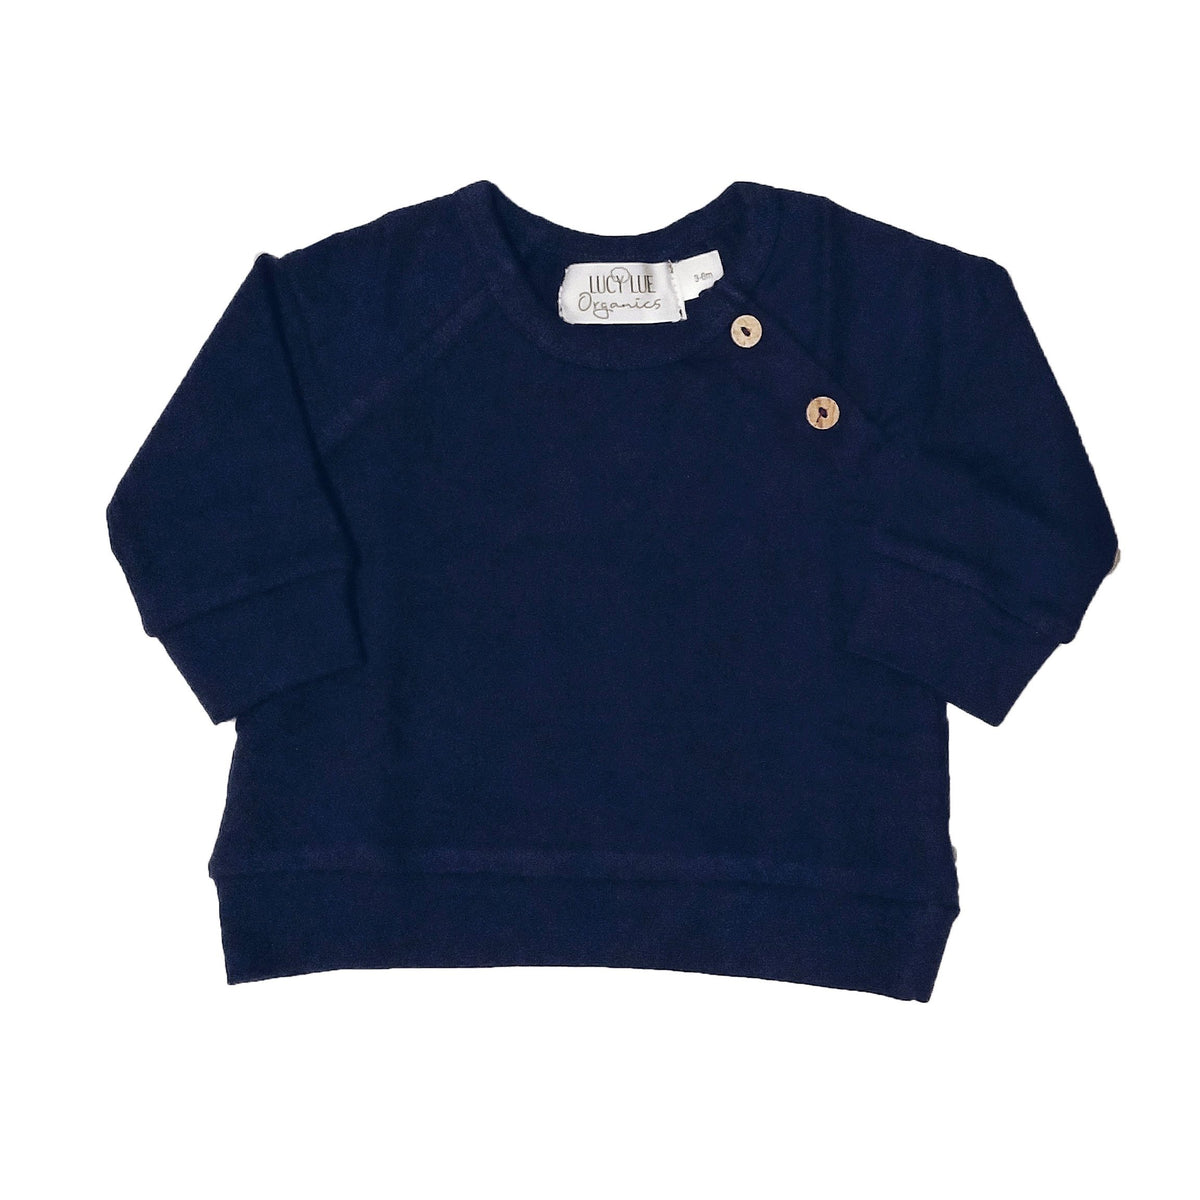 Organic cotton navy blue sweatshirt by Lucy Lue Organics. A favorite baby brand for organic clothes. Pullover baby shirt